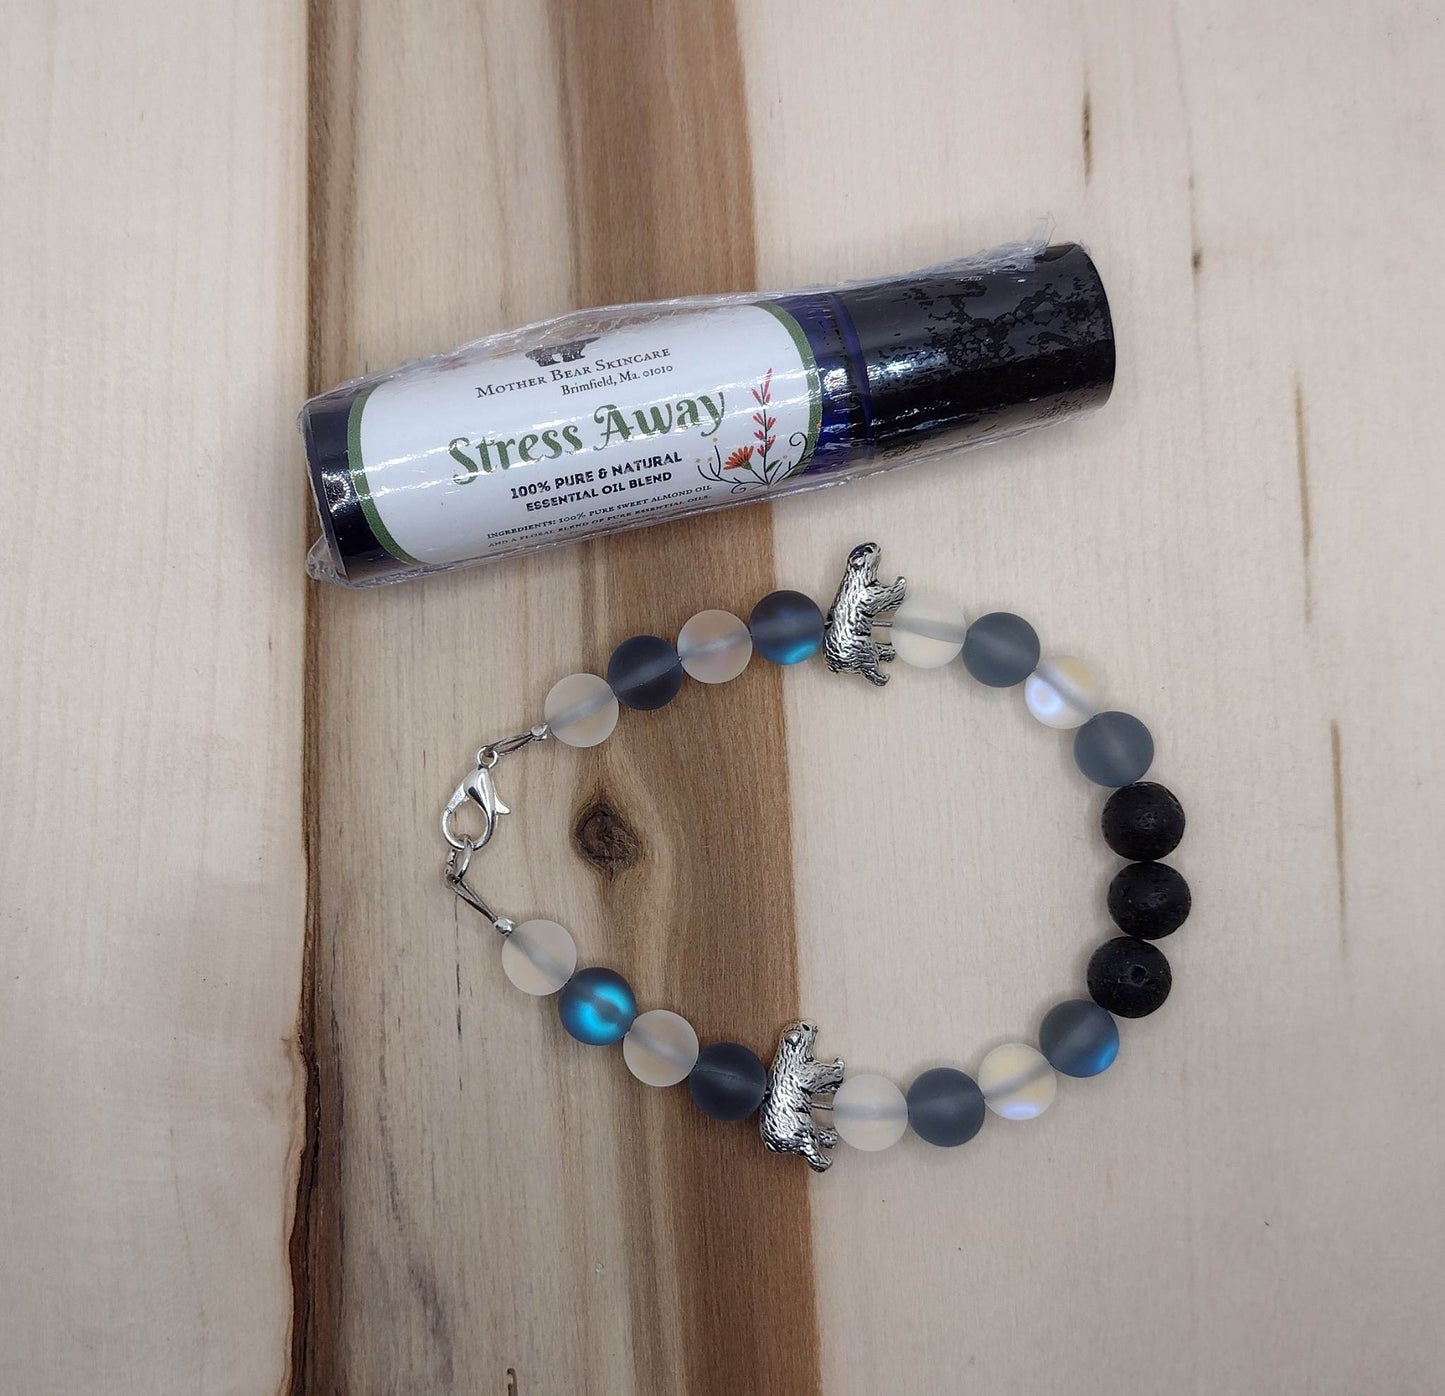 Handmade"Mama Bear"Lava Stone Diffuser Bracelet with "Stress Away" Roll-On Bottle (Pure Essential Oils).